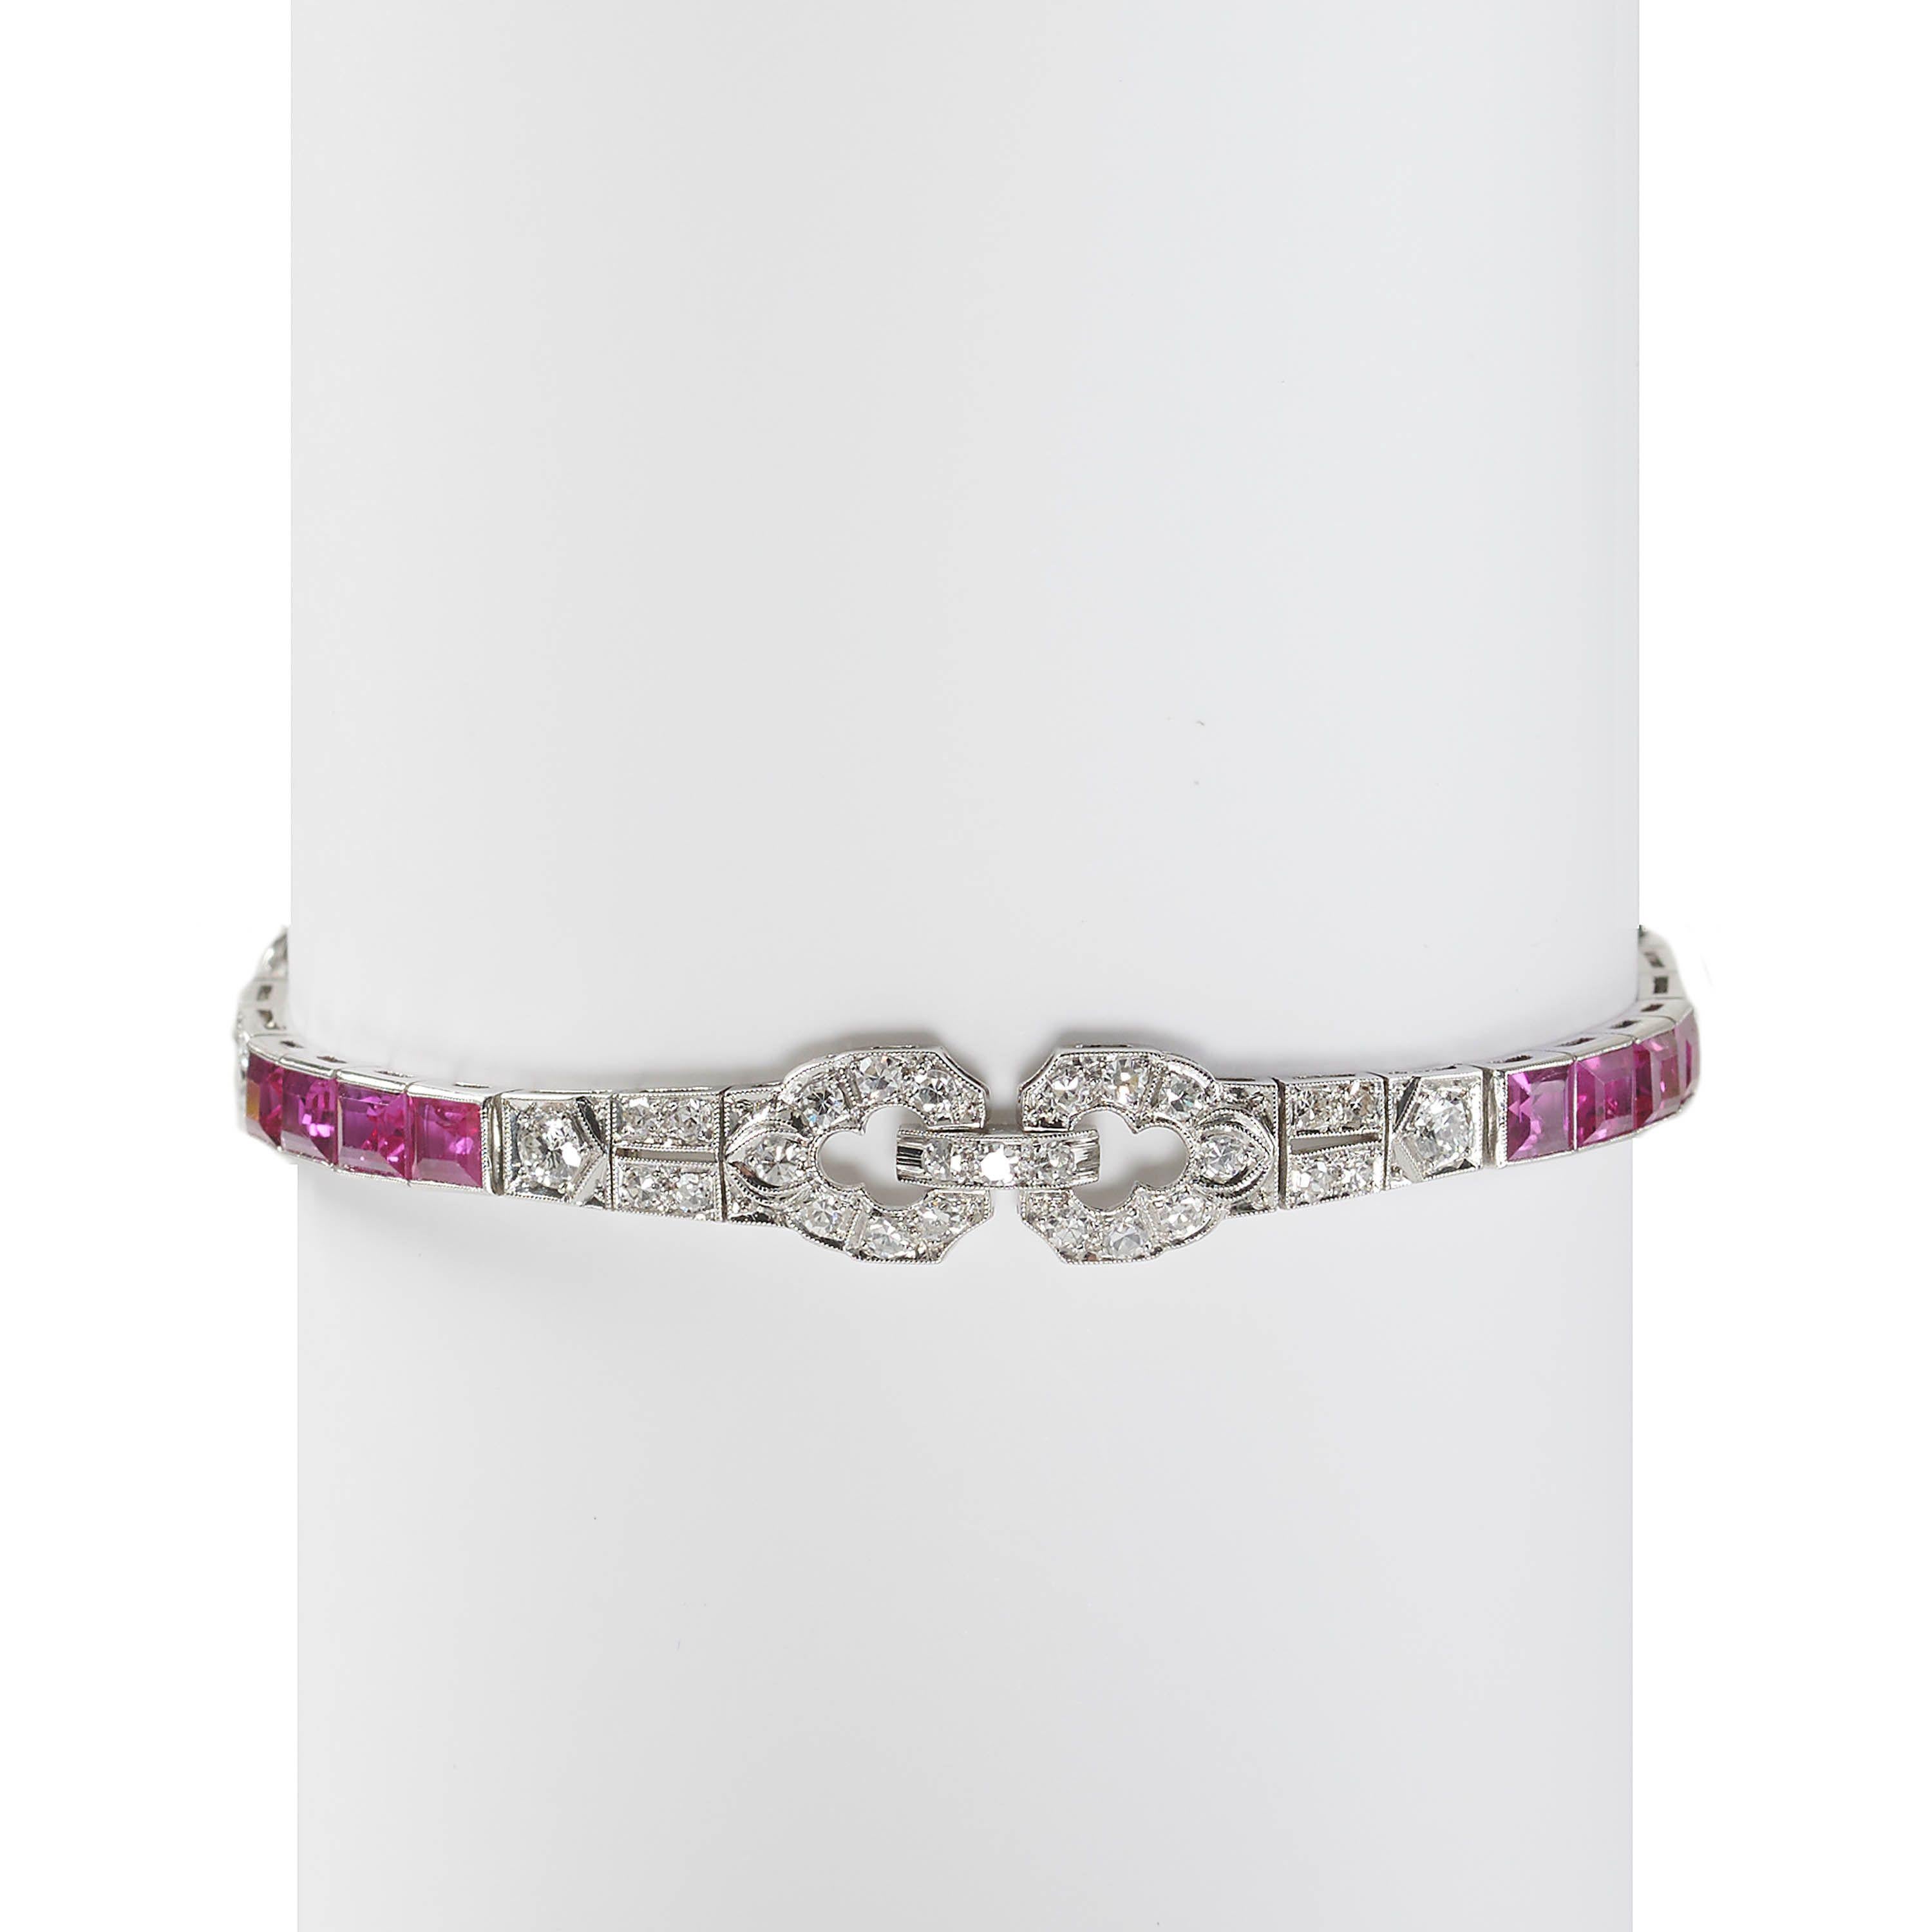 An Art Deco ruby, diamond and platinum bracelet, featuring a repeating pattern of three sets of four baguette-cut rubies, in channel settings and three sets of geometric motifs, set with eight-cut and round brilliant-cut diamonds, in grain settings,